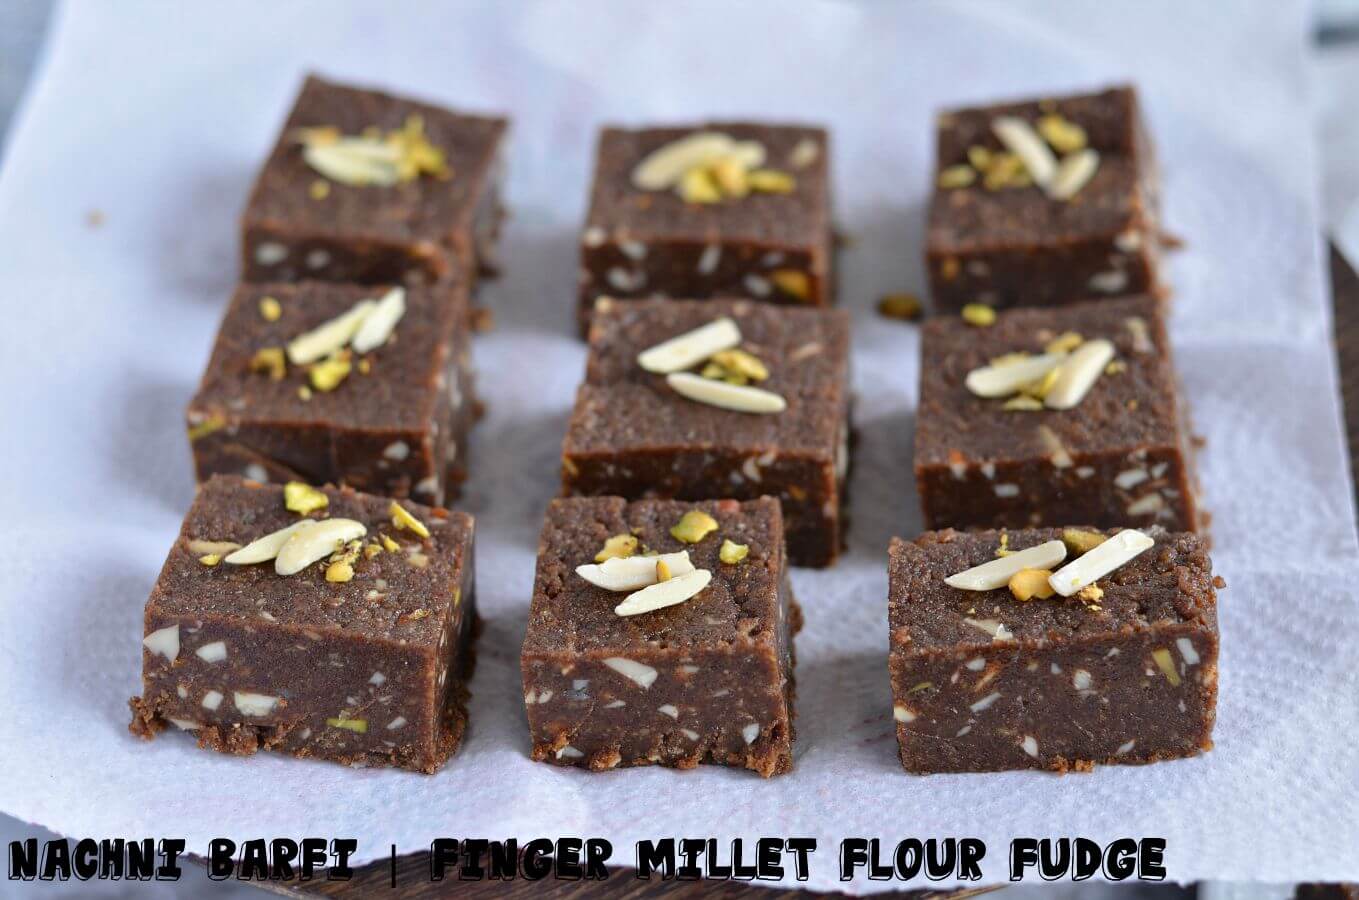 Nachni barfi or ragi barfi is a delicious Indian sweet made with nachni or ragi flour. It is soft and has fudge-like texture. Prepare this healthy finger millet flour sweet on this festive season (Diwali) and enjoy guilt-free sweet.